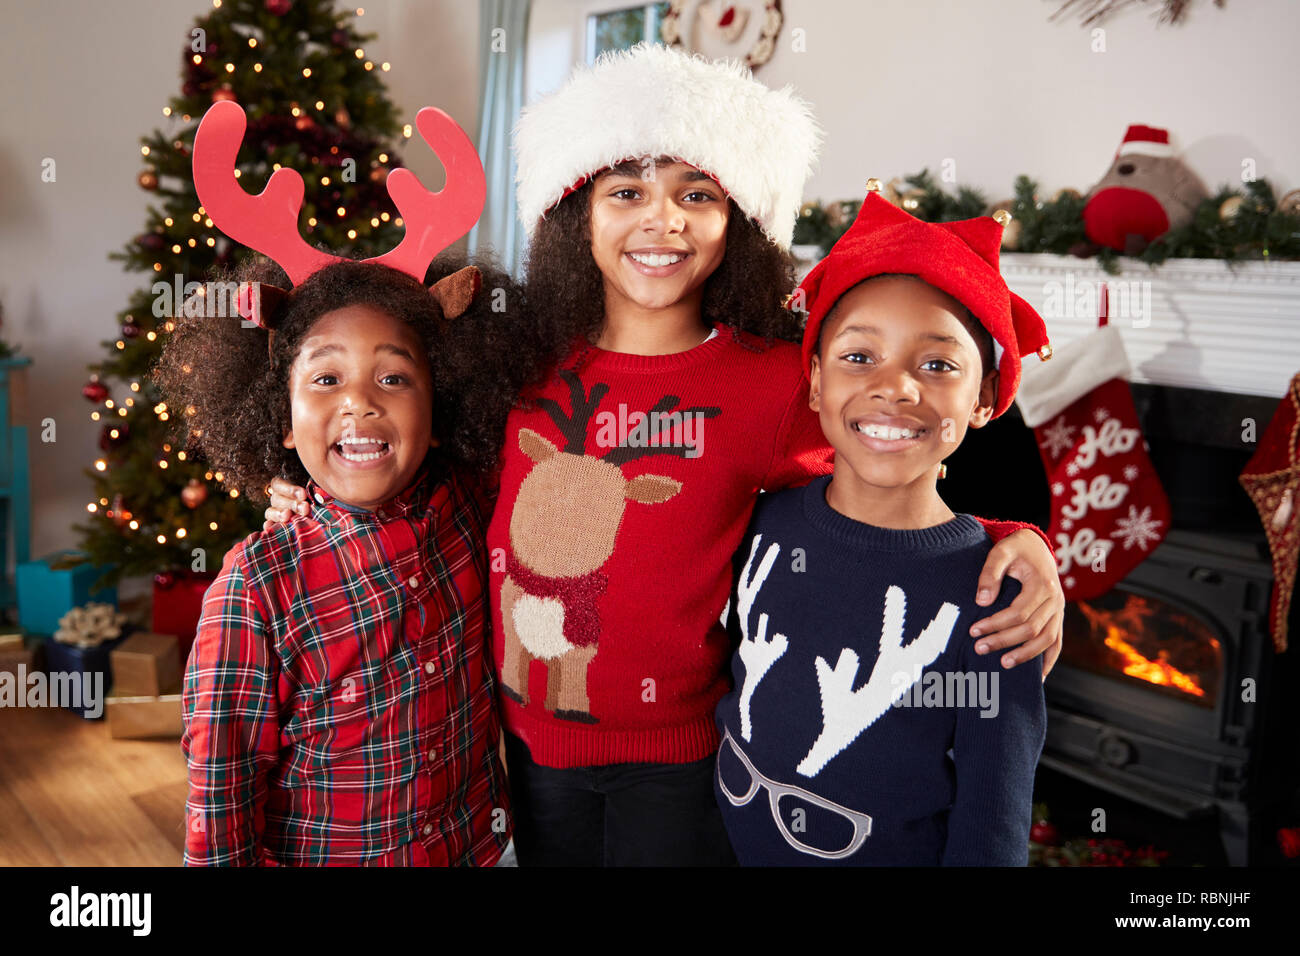 Portrait Of Children Wearing Festive Jumpers And Hats Celebrating Christmas At Home Together Stock Photo